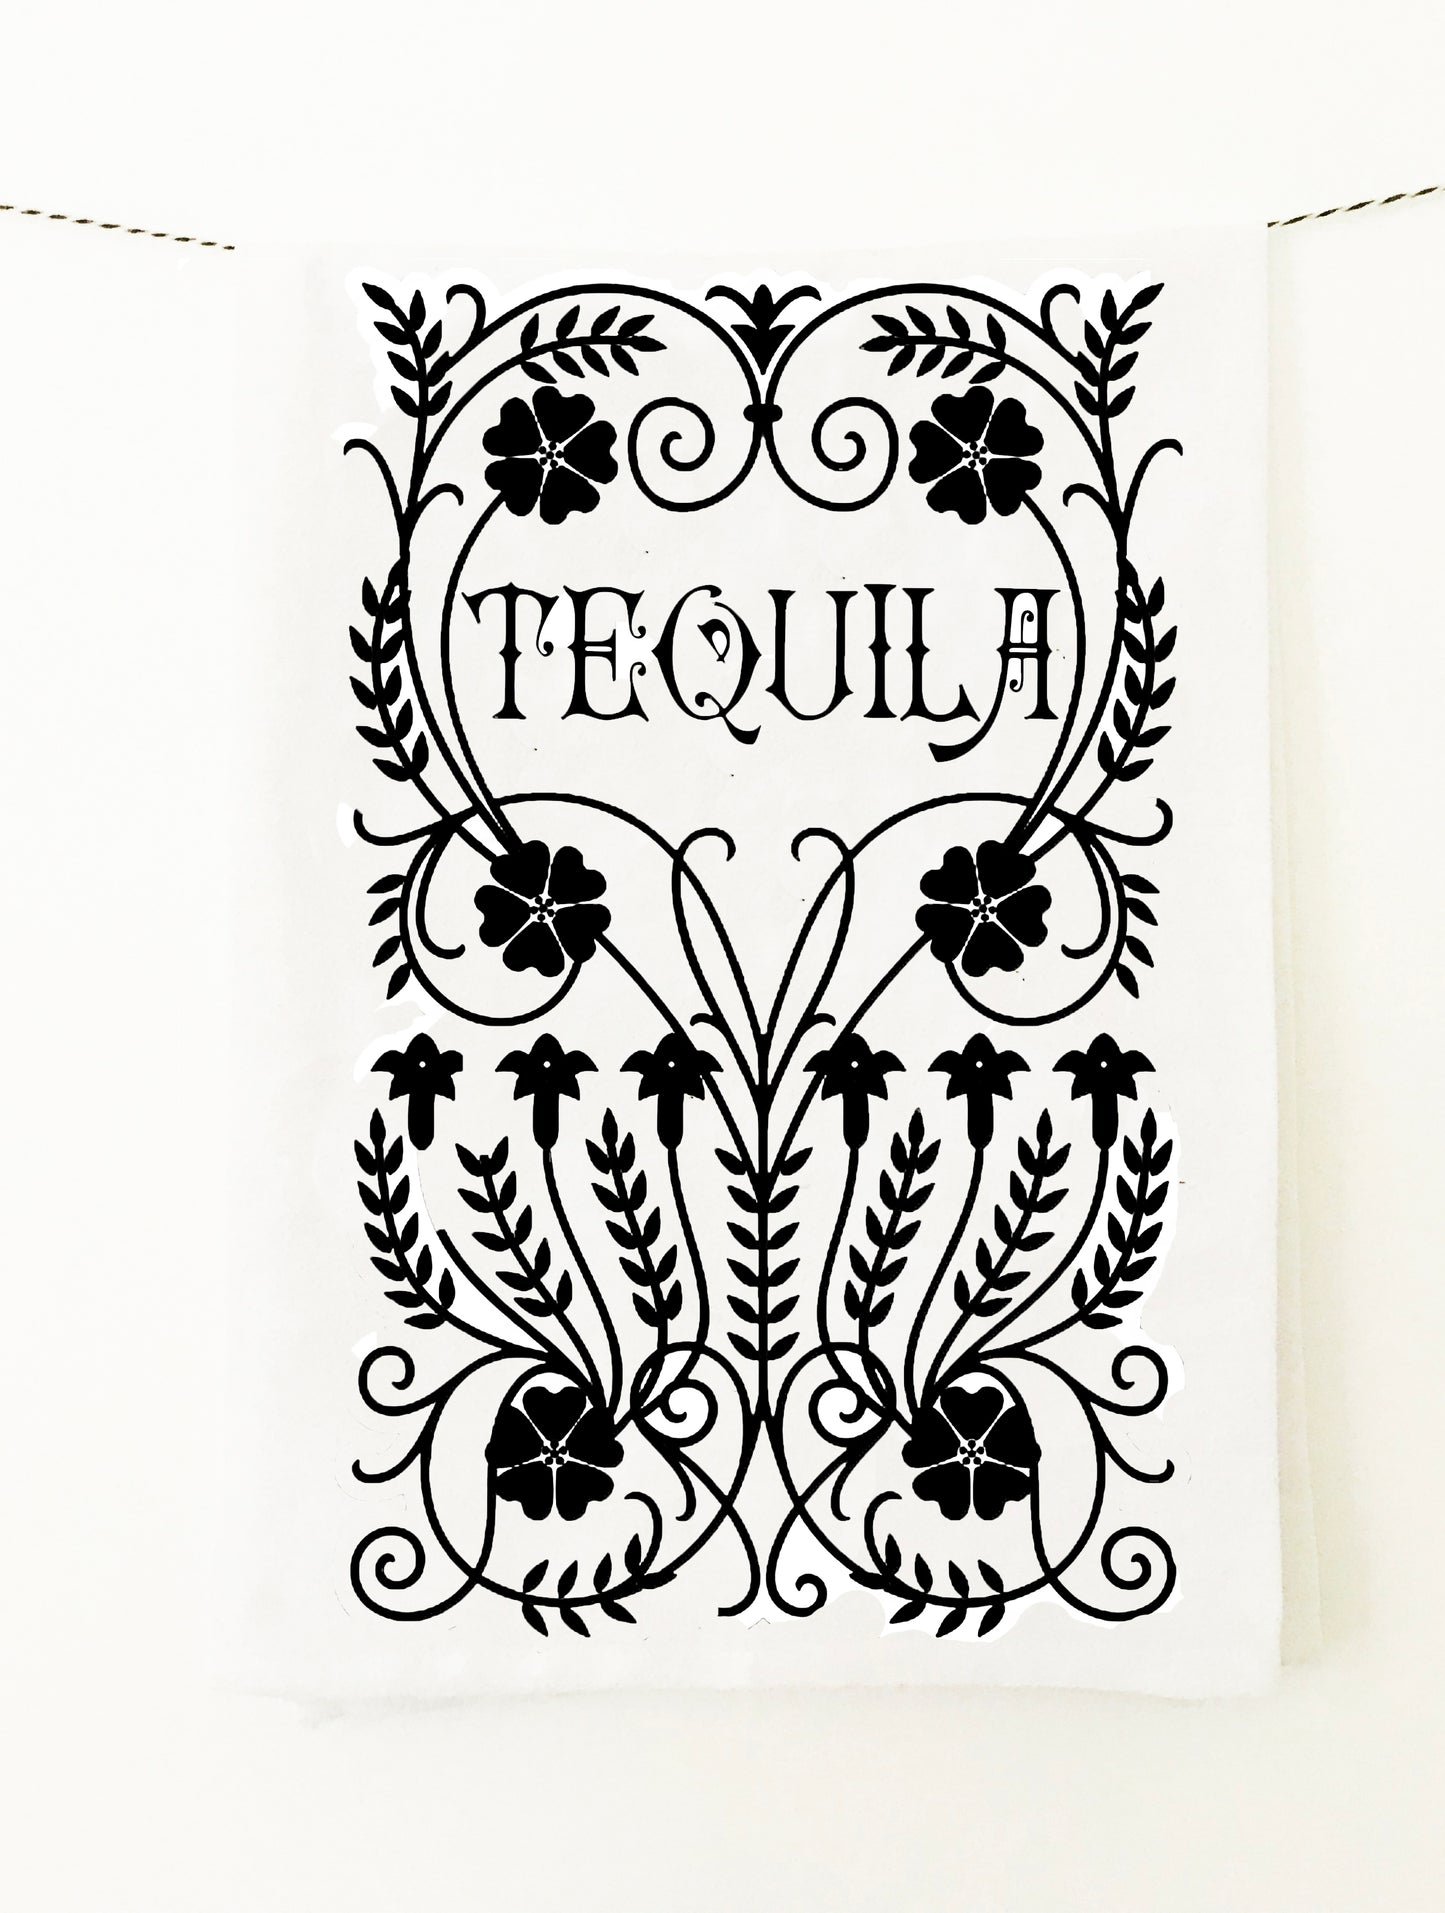 bar towel liquor tequila theme symmetrical floral design screen print drinks with friends cute retro mexican folk large quality cotton towel  coin laundry 